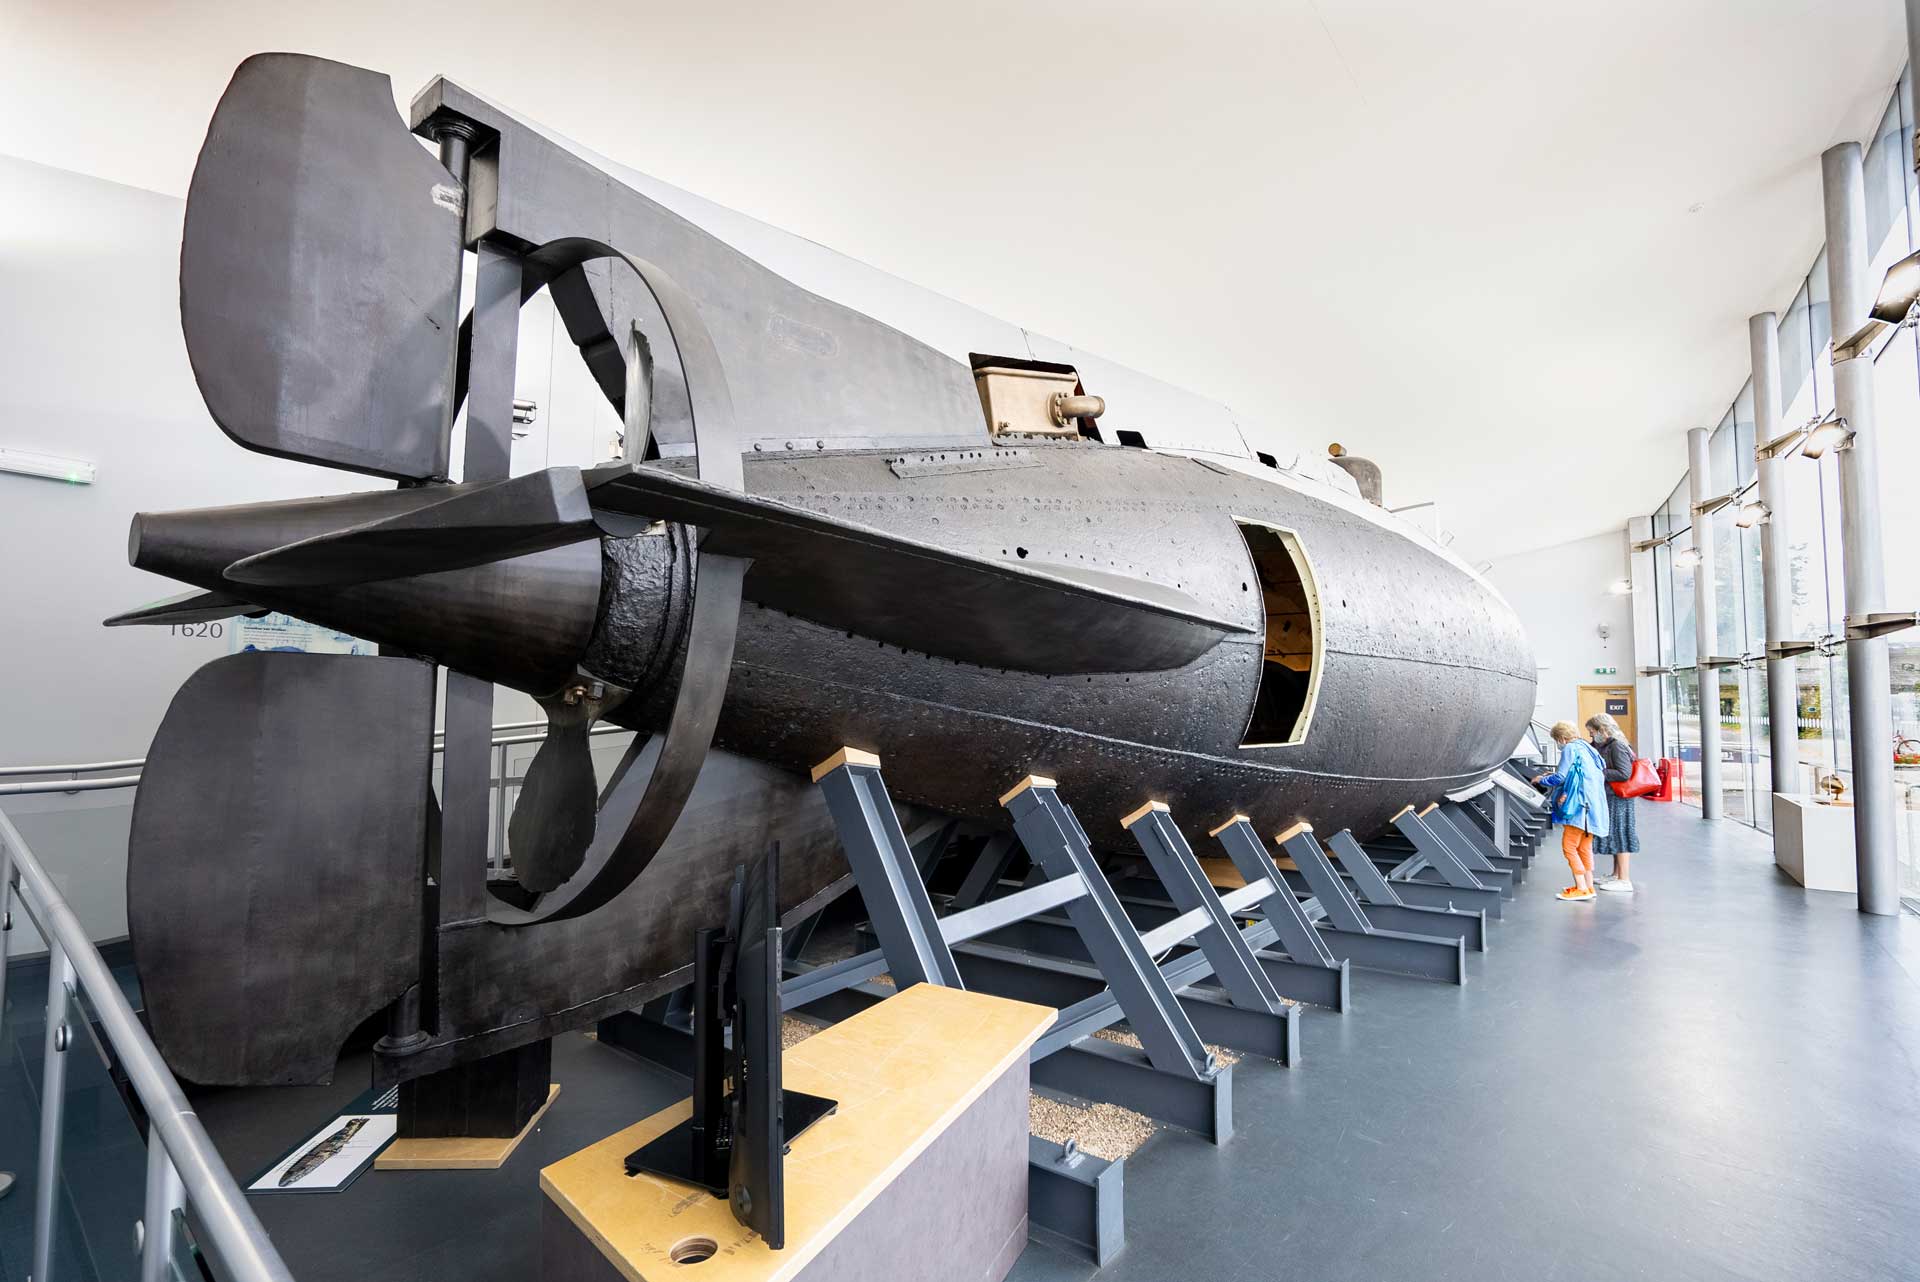 HMS Holland at the Royal Navy Submarine Museum in Gosport